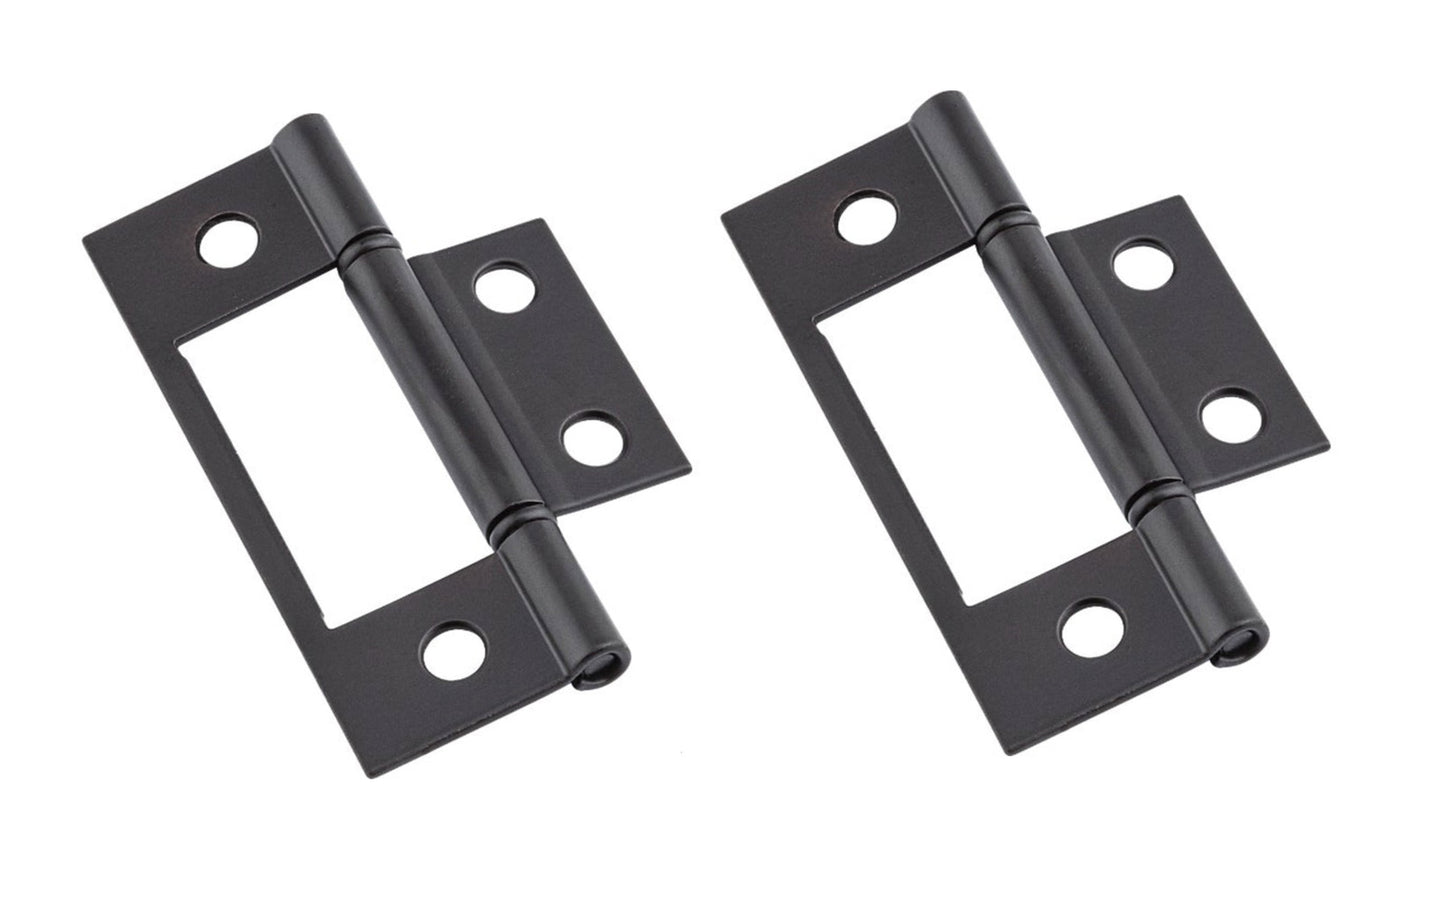 3" Oil Rubbed Bronze Surface Mount Hinges ~ 2 Pack. These non mortise hinges are designed for use on bi-fold doors at least 1" thick. Non-removable tight, non-rising pin. Surface mount, mortising is not required. Sold as 2 hinges in pack. National Hardware Model No. N830-434. 886780020373